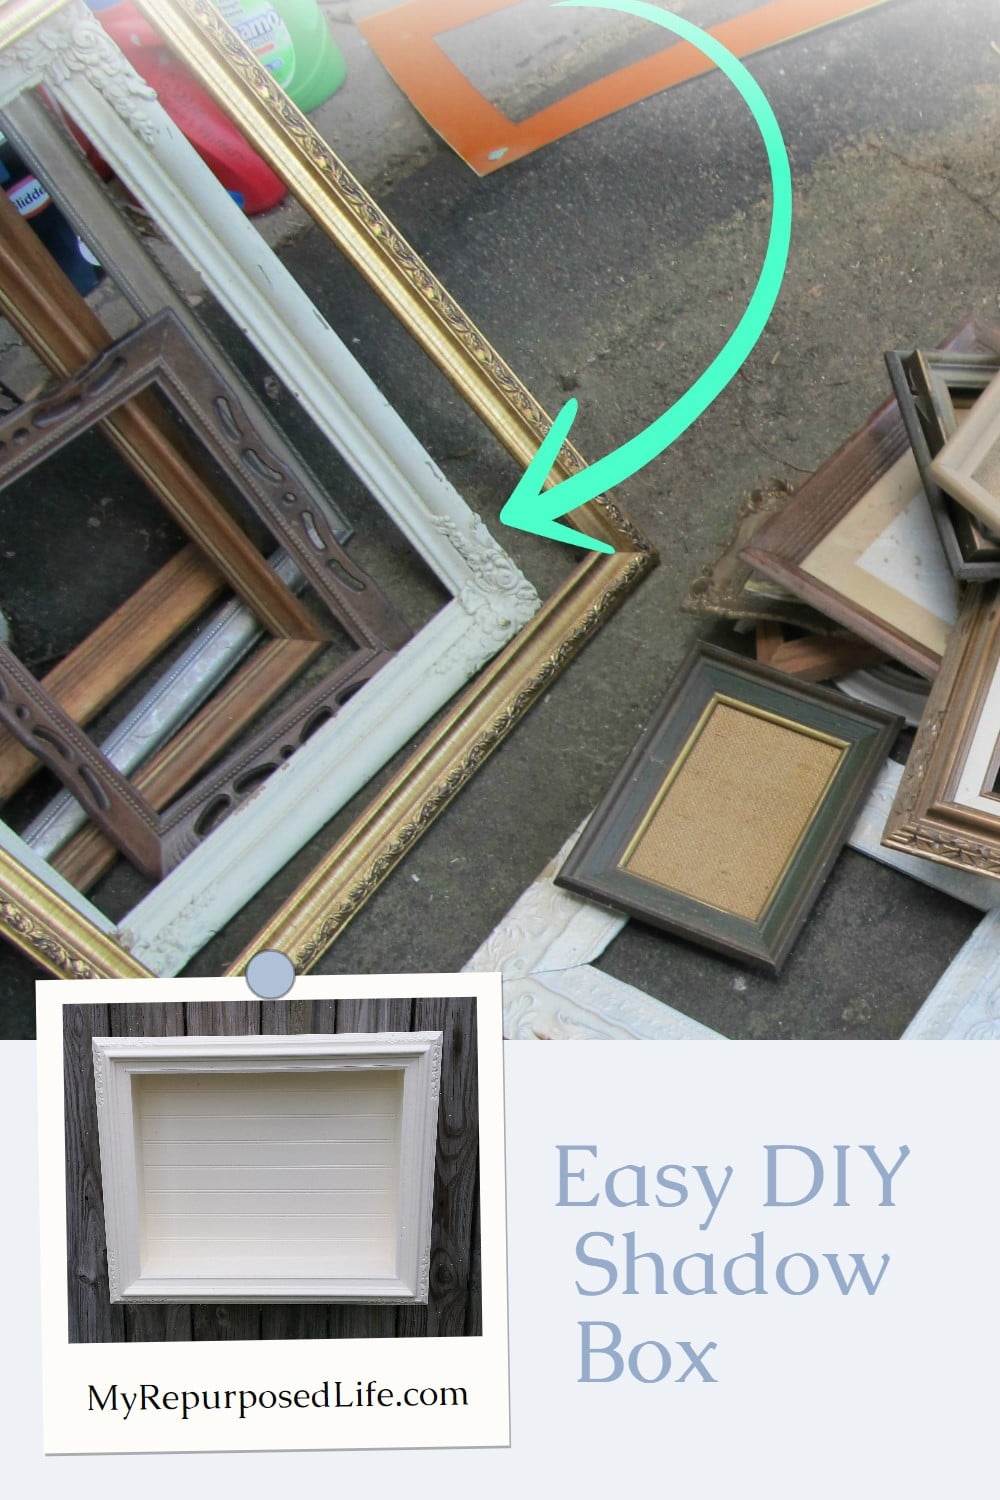 Step by step directions on how to make an easy shadow box out of a thrift store picture frame. The possibilities are endless. #myrepurposedlife #repurposed #pictureframe #shadowbox #diy #easy #project via @repurposedlife